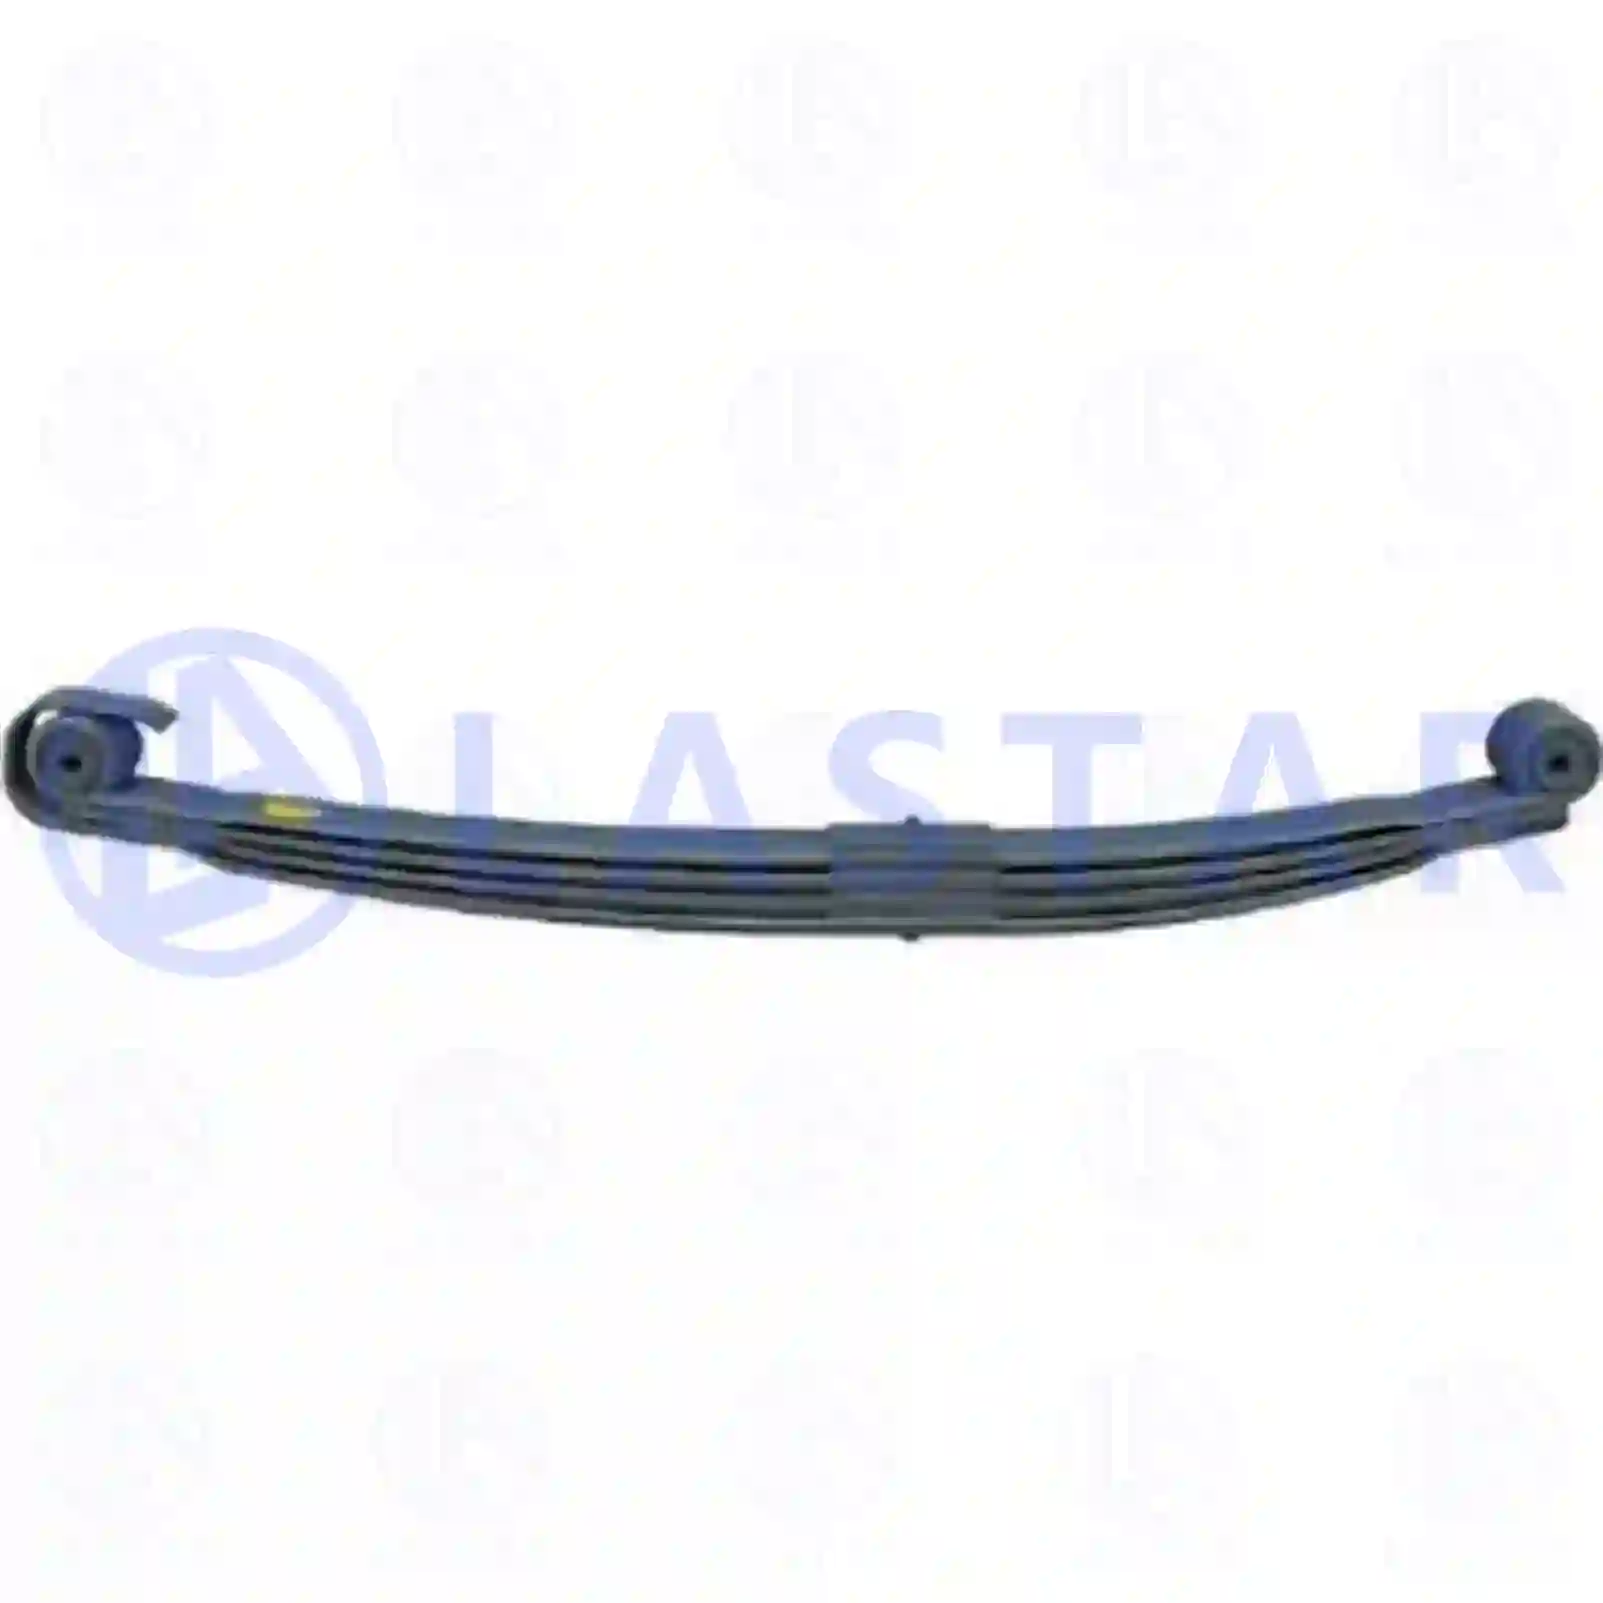 Leaf spring, front, 77728096, 9493200402 ||  77728096 Lastar Spare Part | Truck Spare Parts, Auotomotive Spare Parts Leaf spring, front, 77728096, 9493200402 ||  77728096 Lastar Spare Part | Truck Spare Parts, Auotomotive Spare Parts